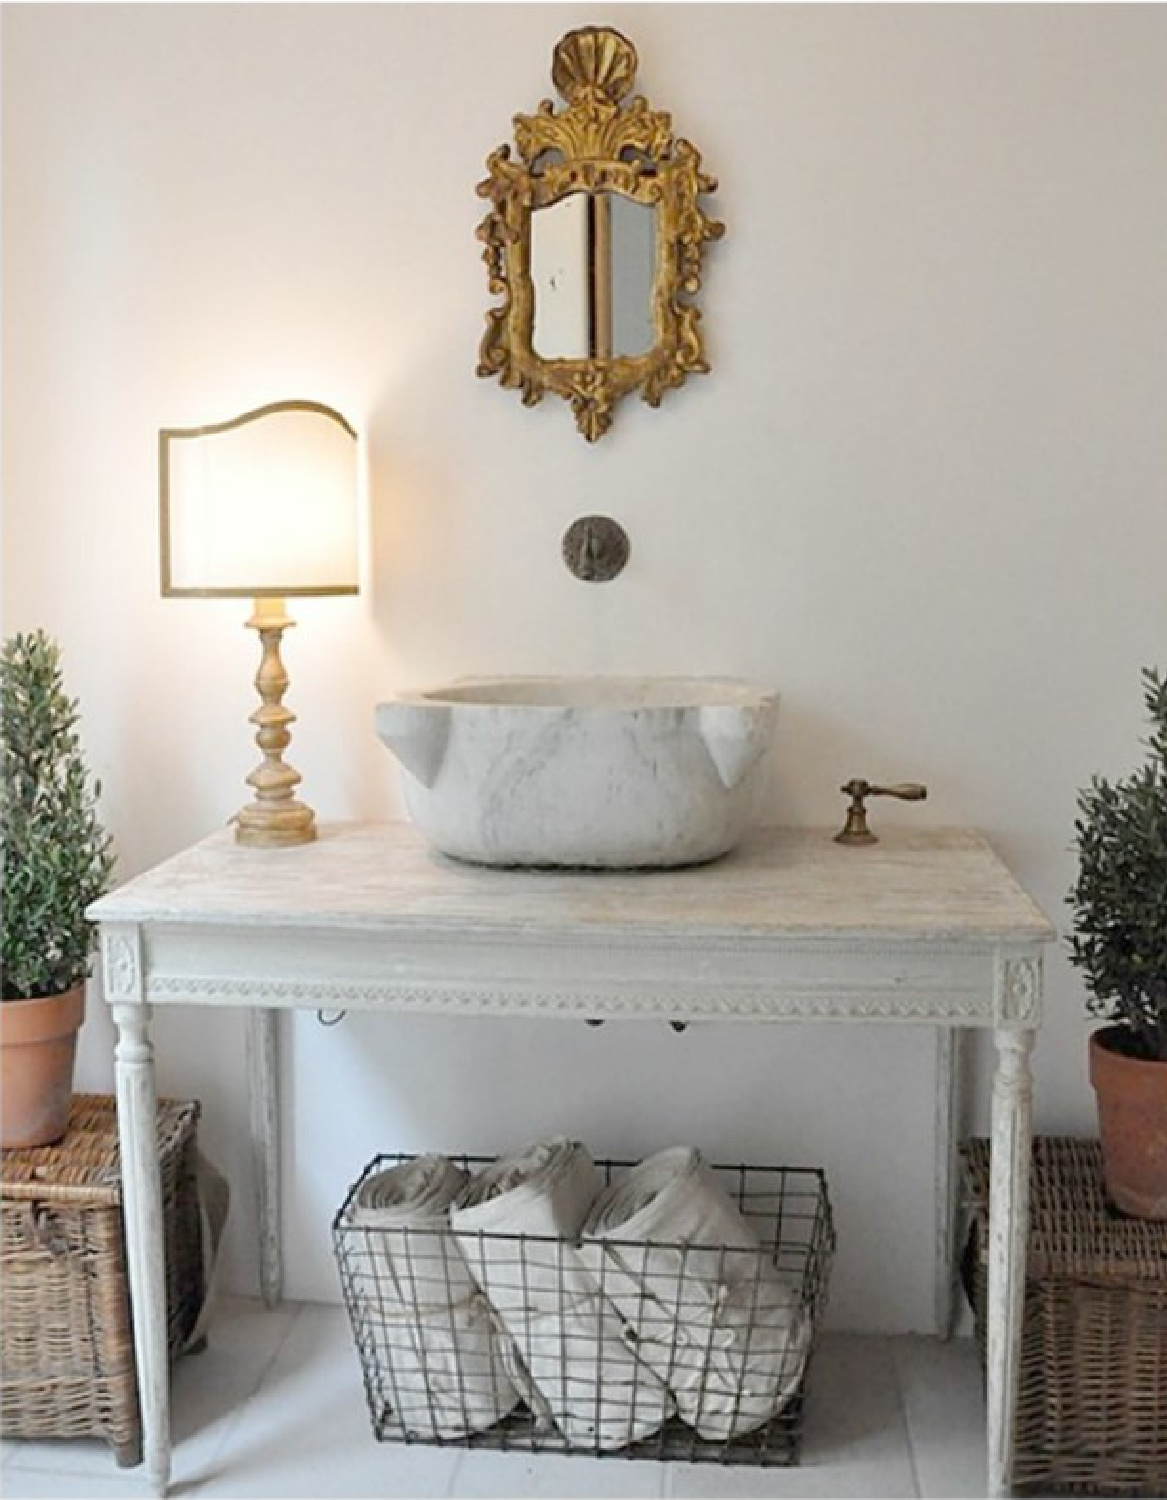 Beautiful Swedish antique repurposed vanity with vessel sink in French country bath at Patina Farm - Brooke Giannetti.